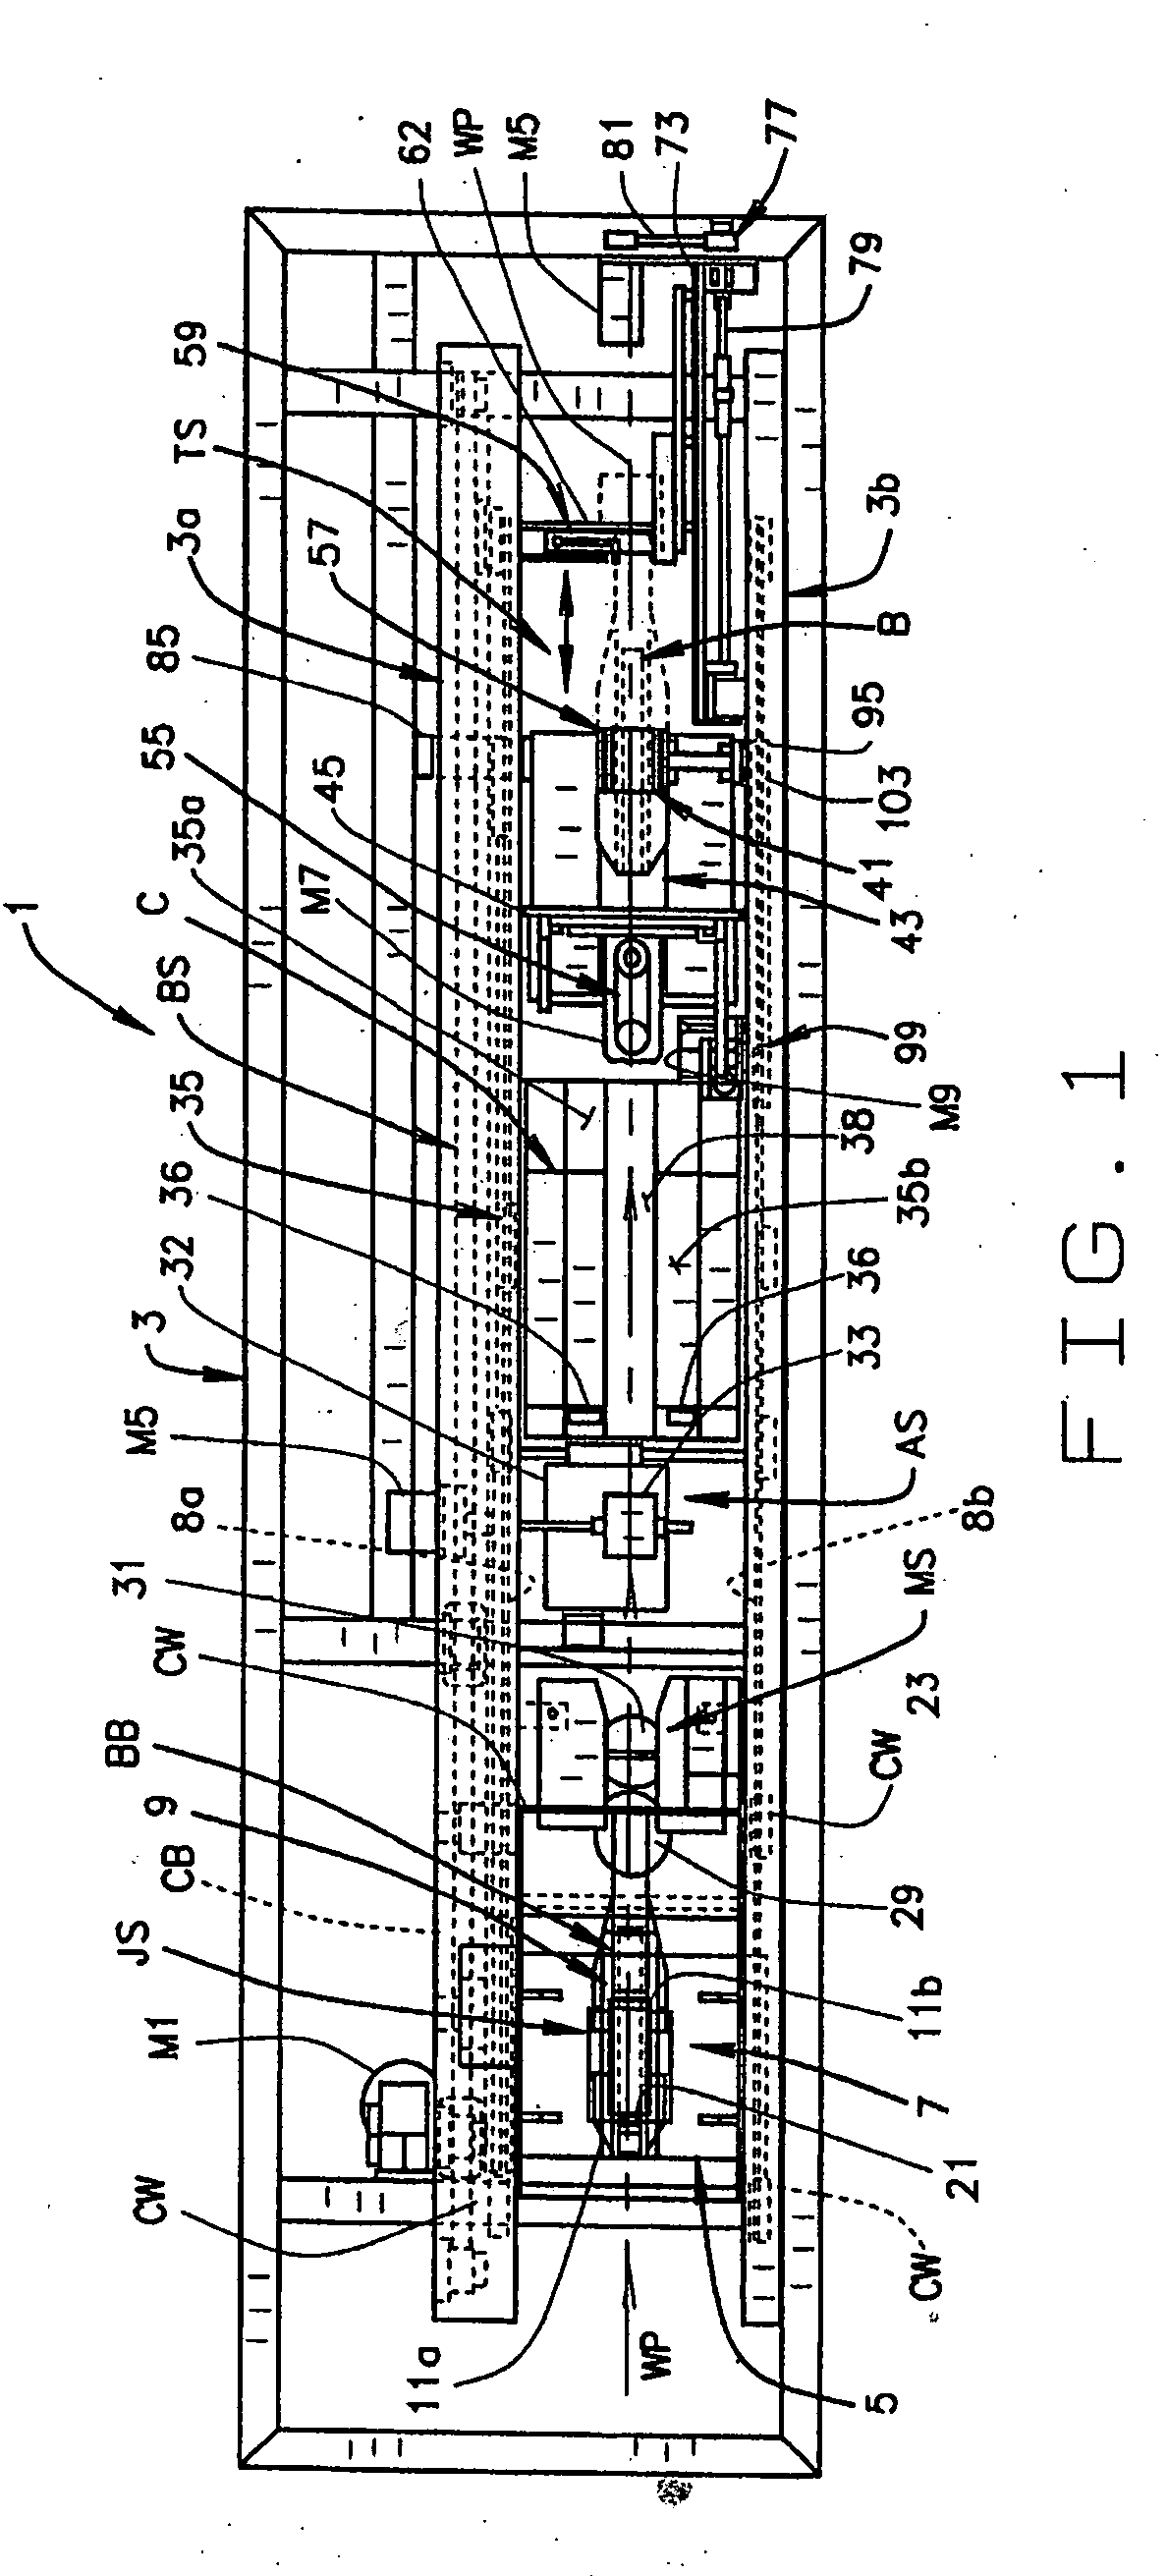 Apparatus and method of on demand printing, binding, and trimming a perfect bound book